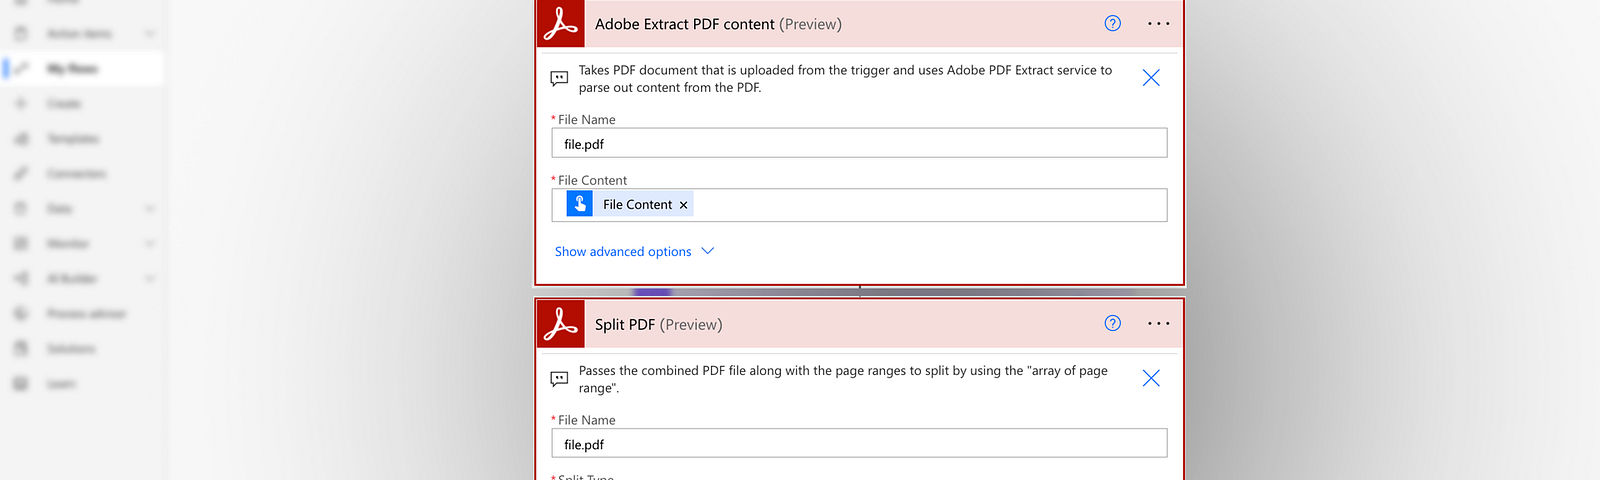 Split PDFs Based on Content with Adobe PDF Extract Service with Microsoft  Power Automate, by Ben Vanderberg